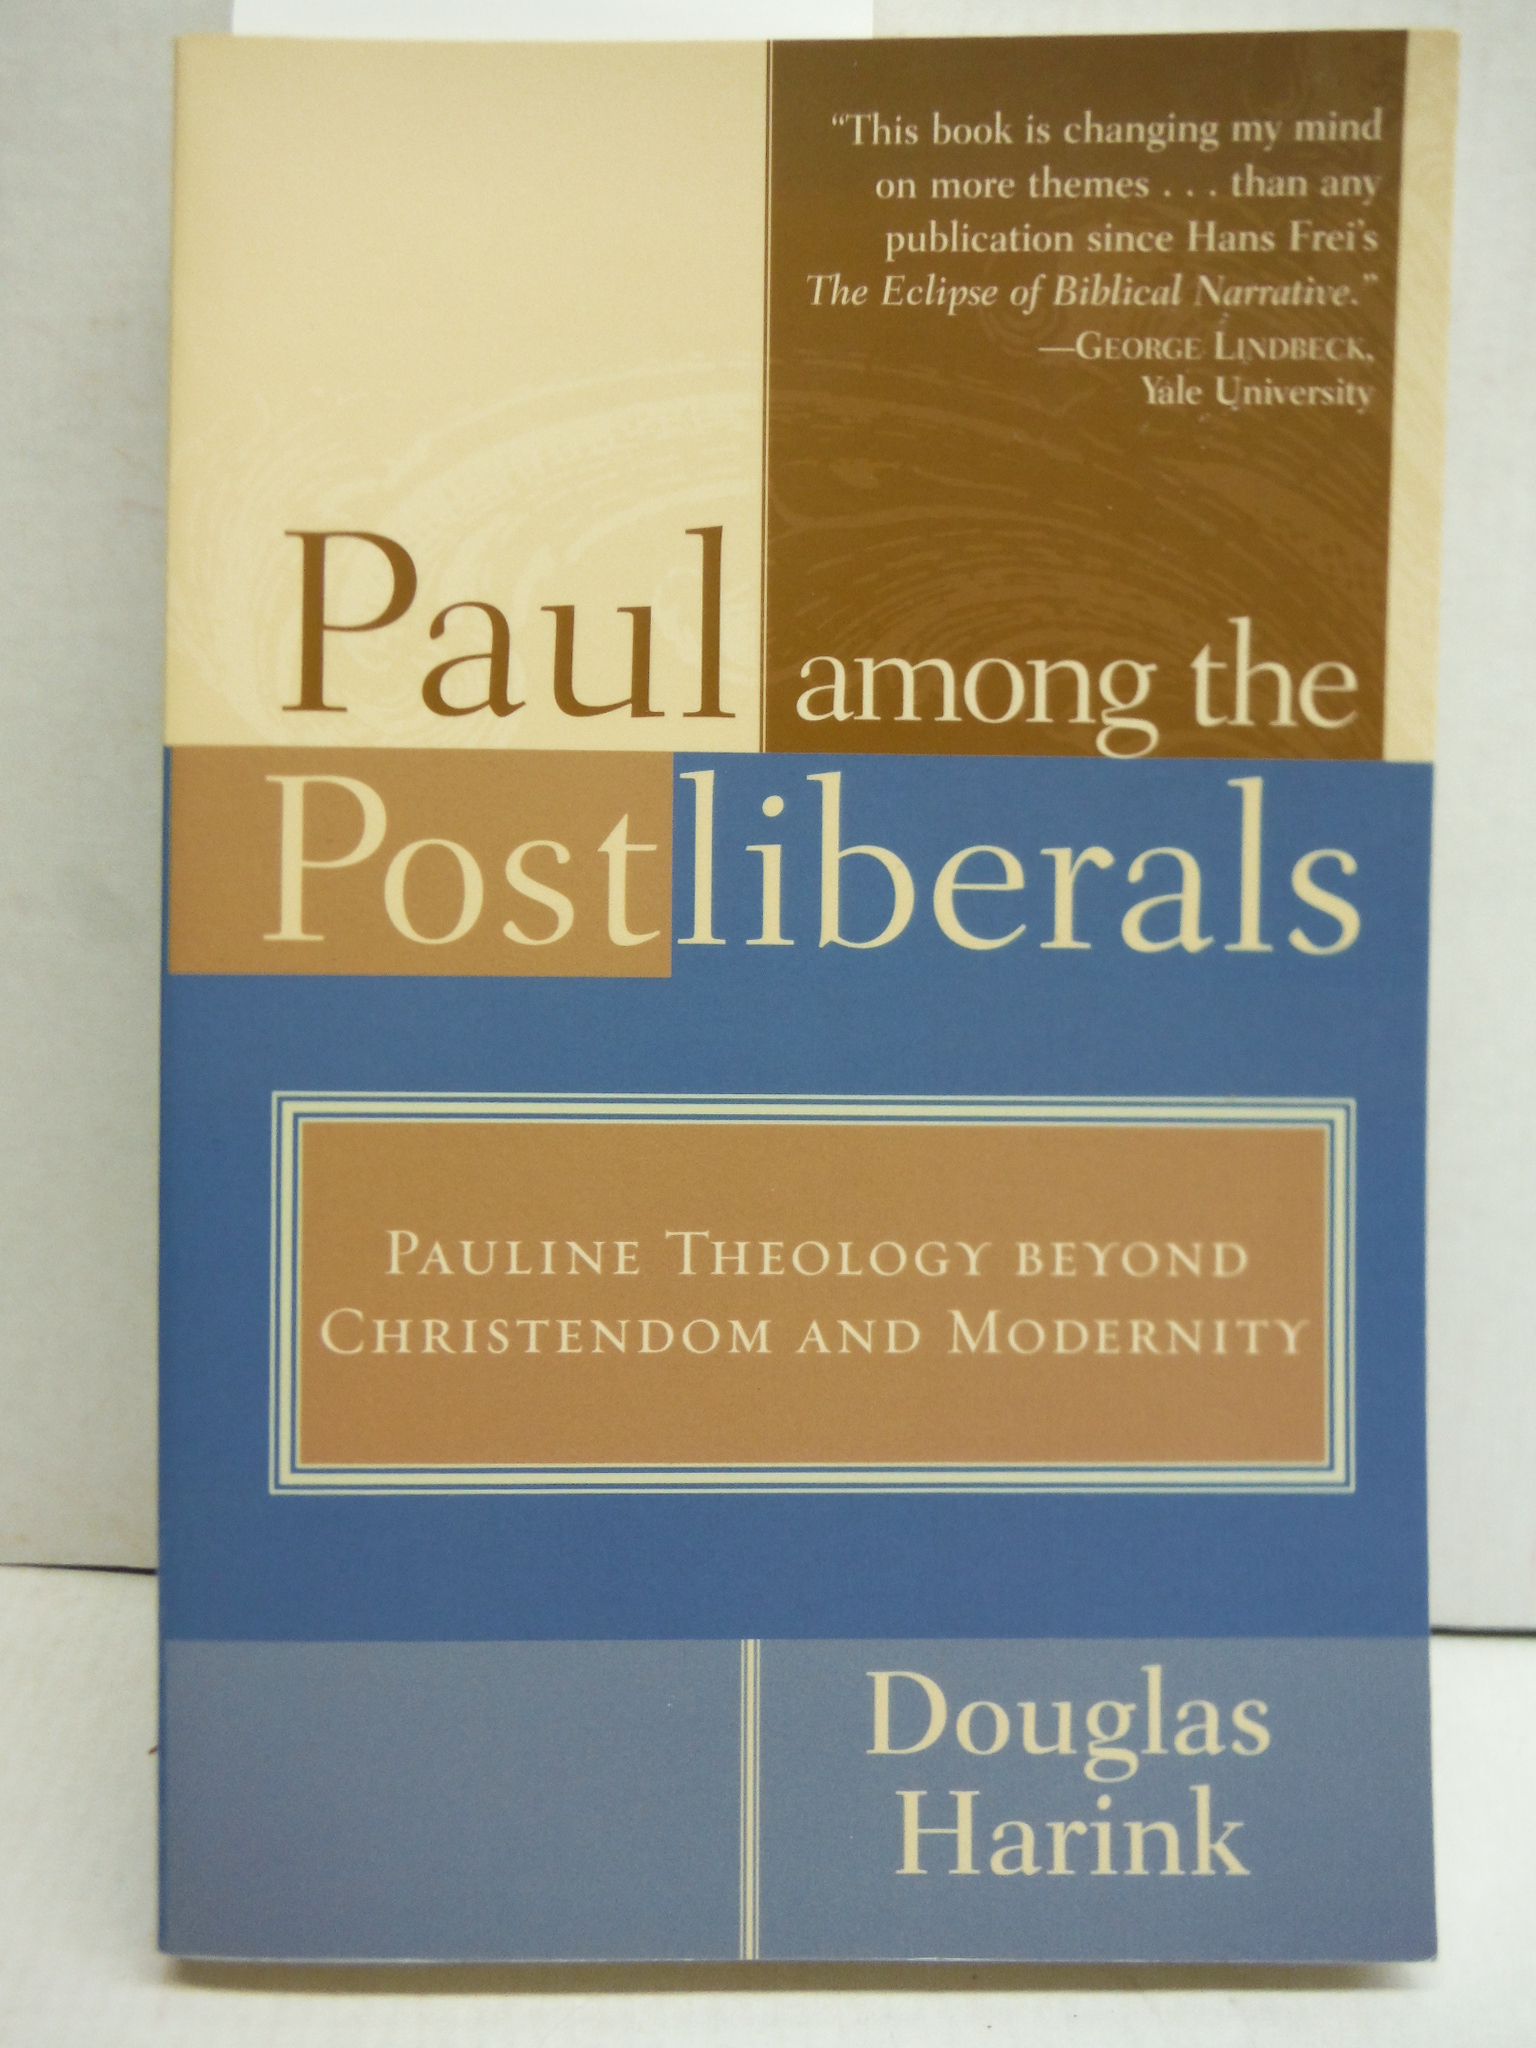 Paul among the Postliberals